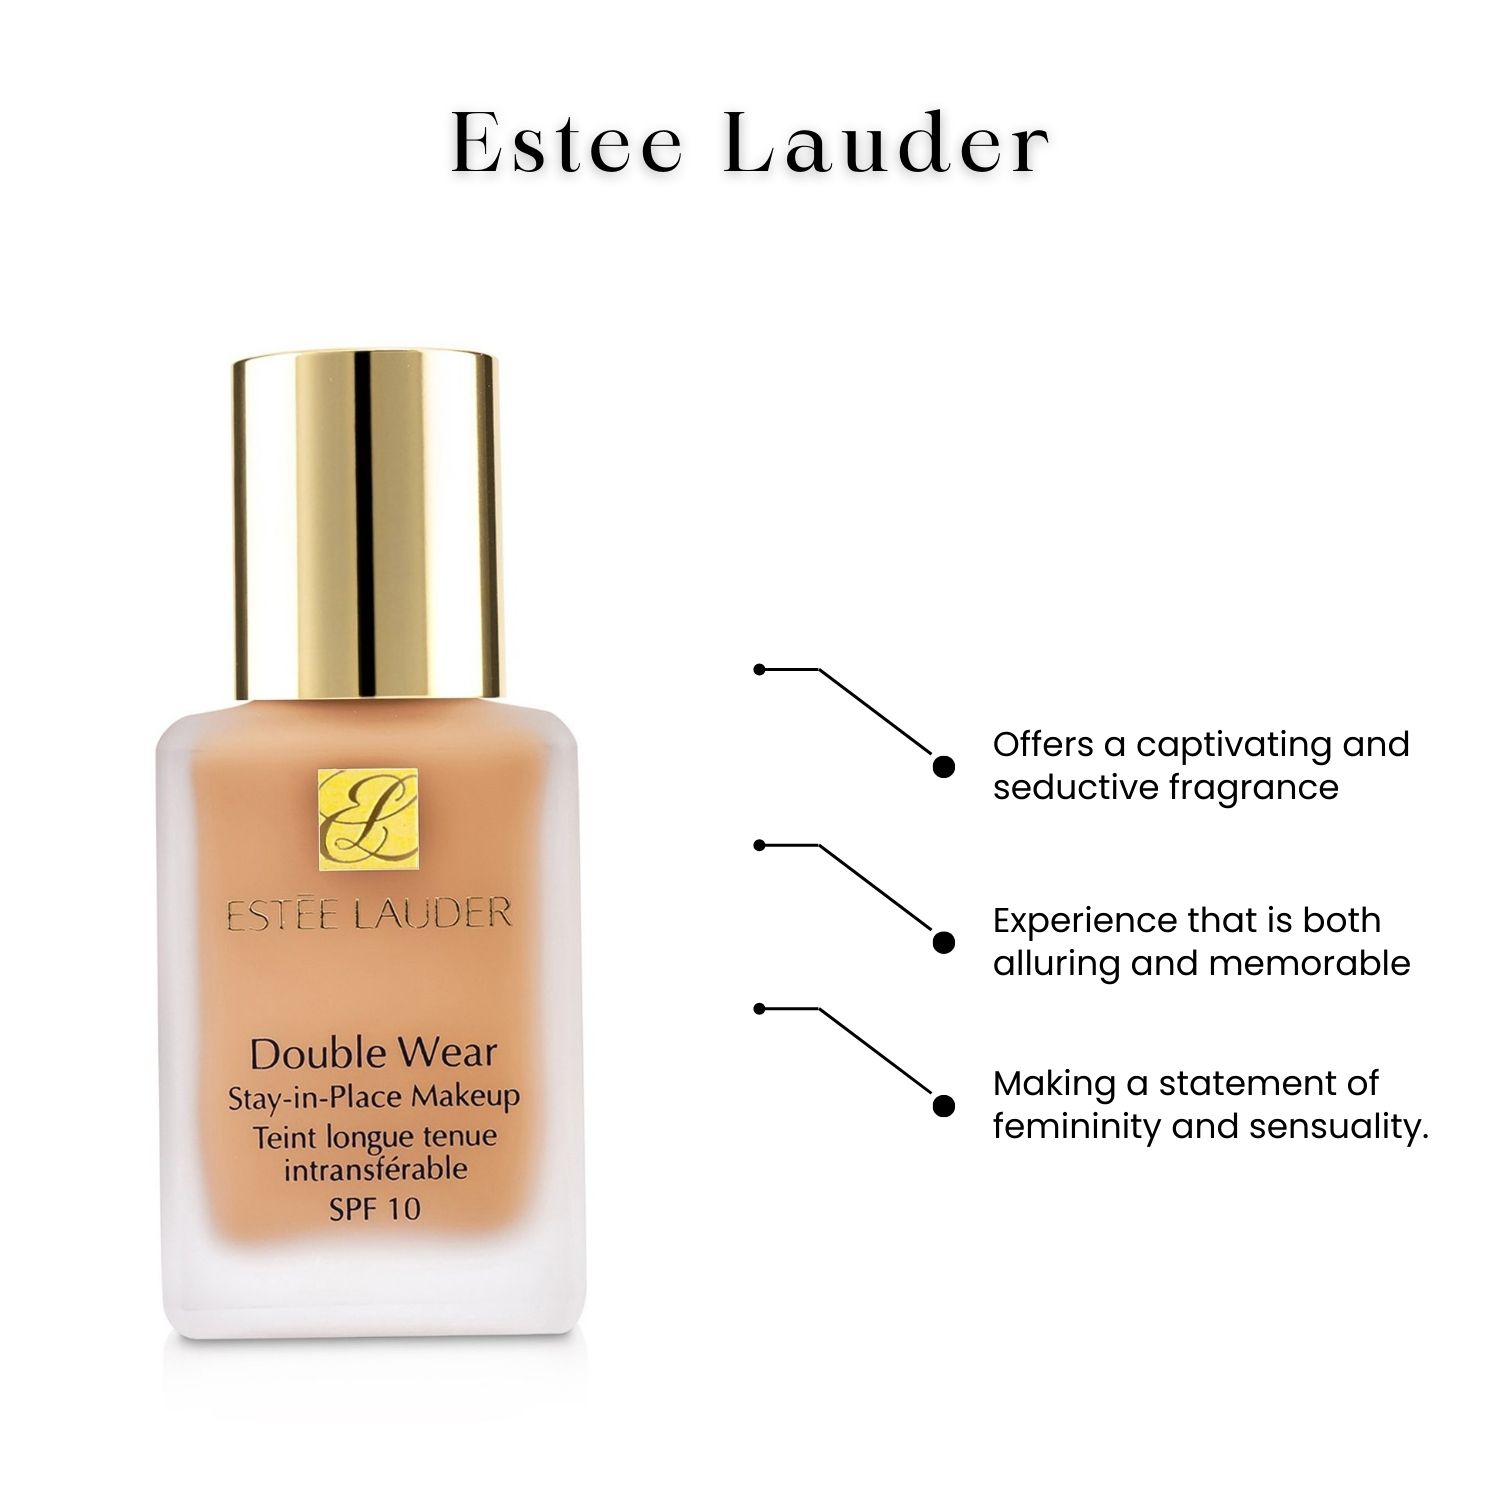 Estee Lauder Double Wear Stay-in Place Makeup Spf 10 - 2c1 Pure Beige 1 oz/30 ml - image 3 of 5